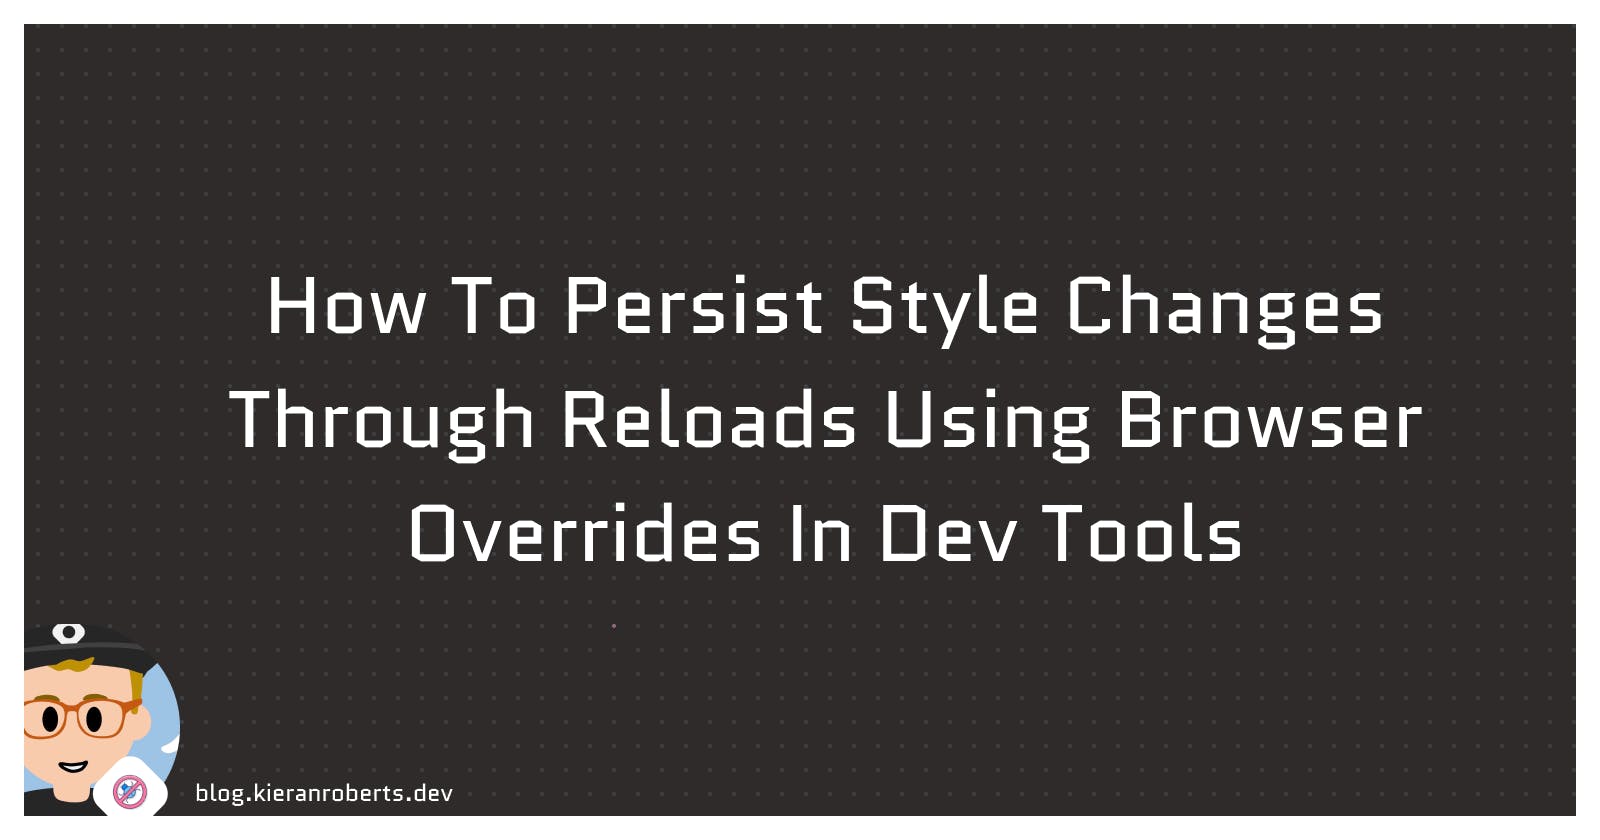 How To Persist Style Changes Through Reloads Using Overrides In Dev Tools